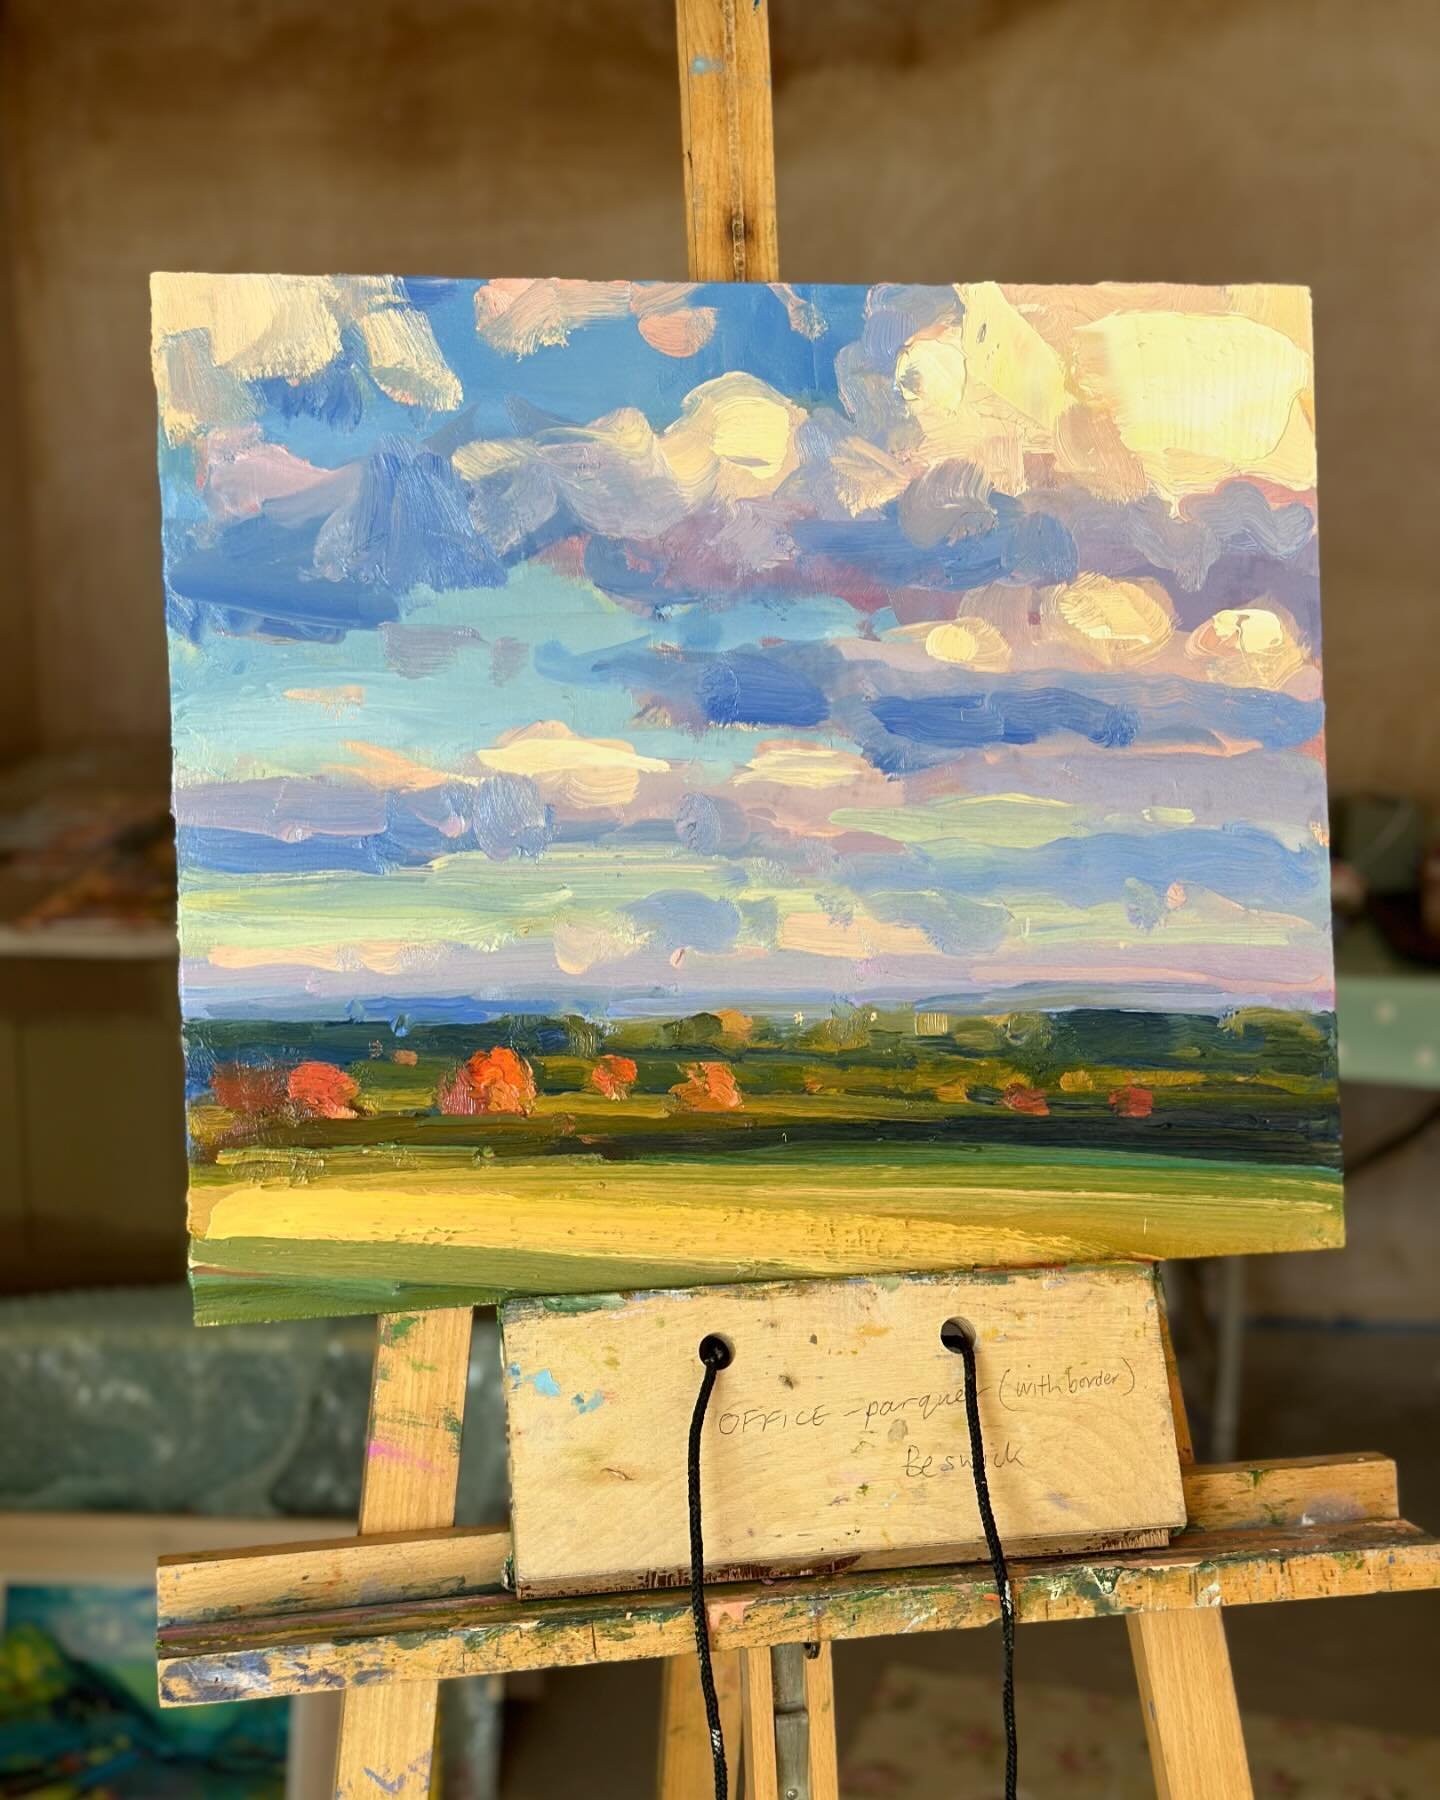 Finished this large painting today. I&rsquo;ve got so many #wips going on in the studio really felt like I had to get something finished (which I definitely have to be in a certain type of mood for - MUCH easier starting paintings!) but think I&rsquo